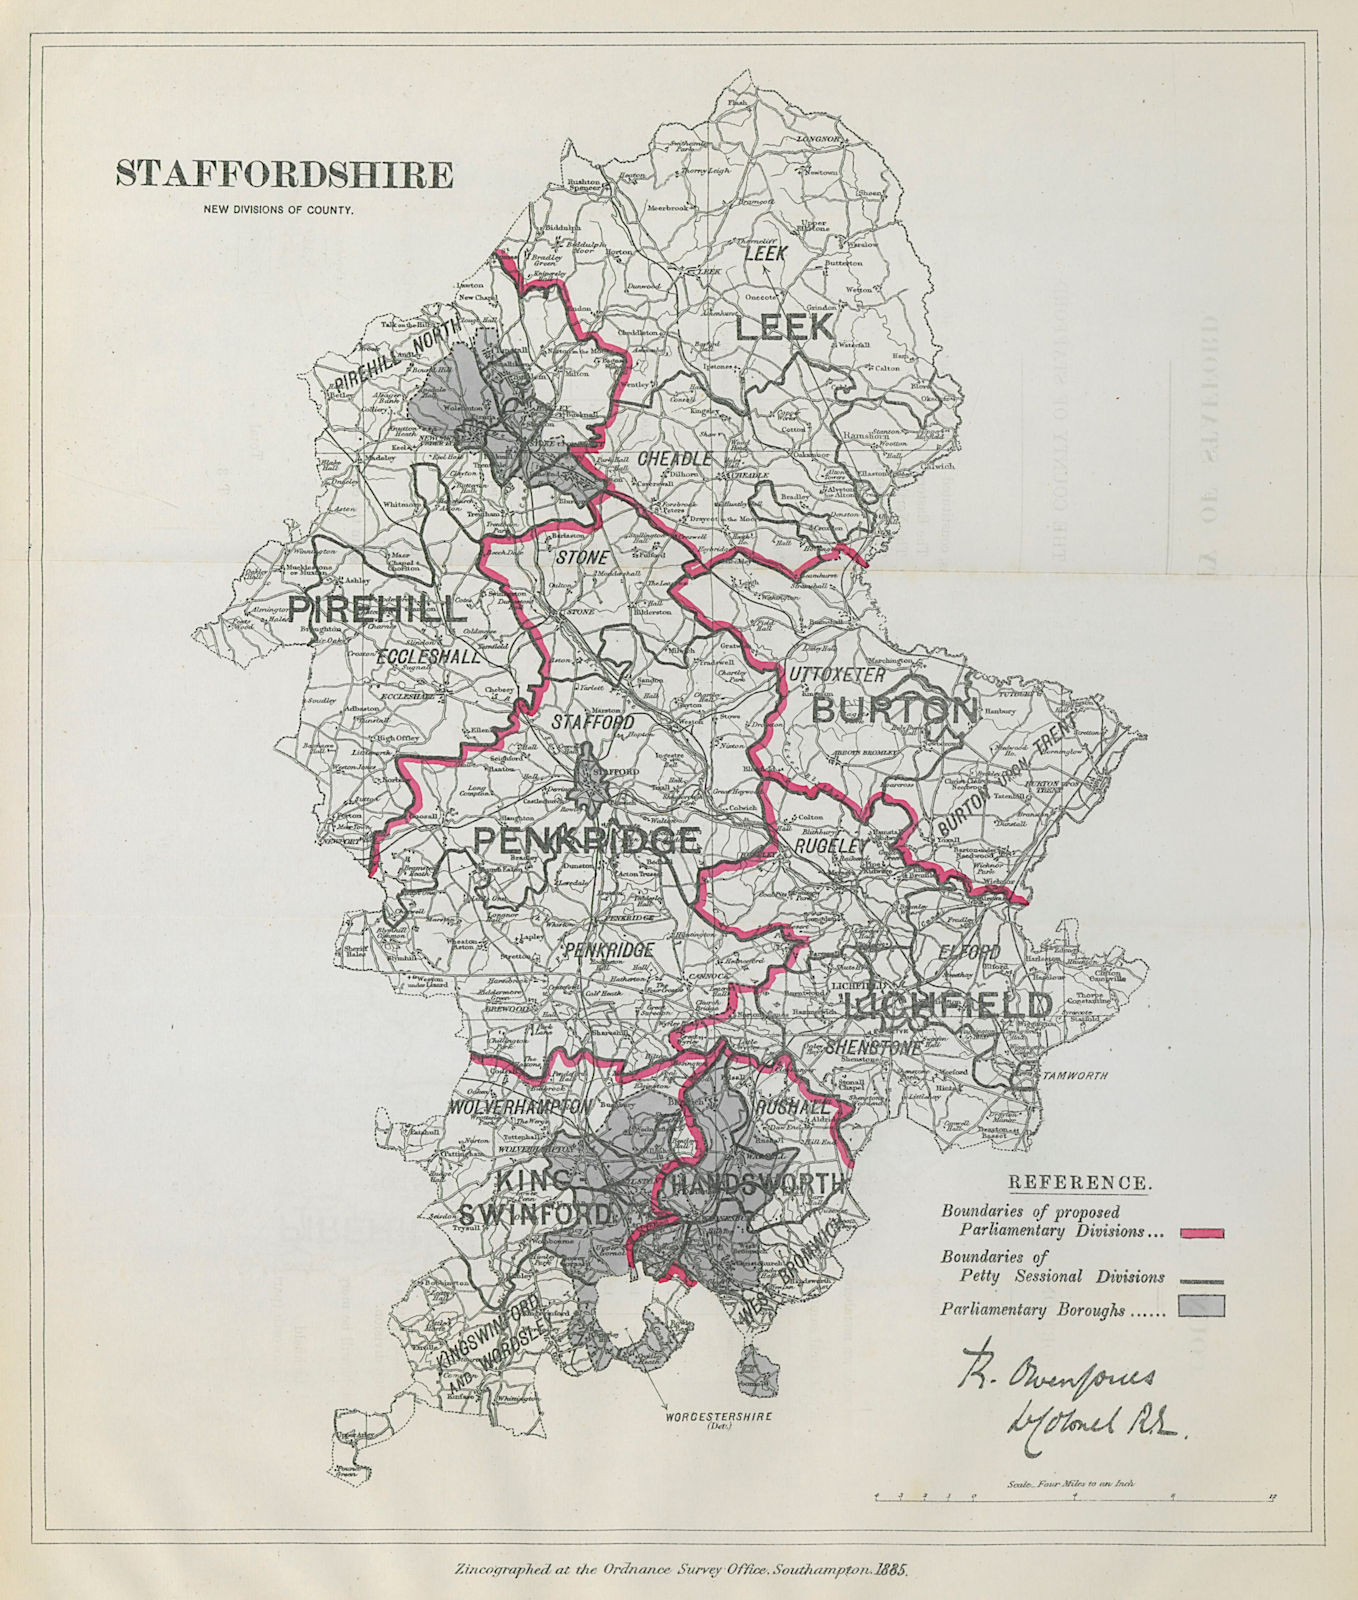 Staffordshire Parliamentary Divisions. Lichfield. BOUNDARY COMMISSION 1885 map